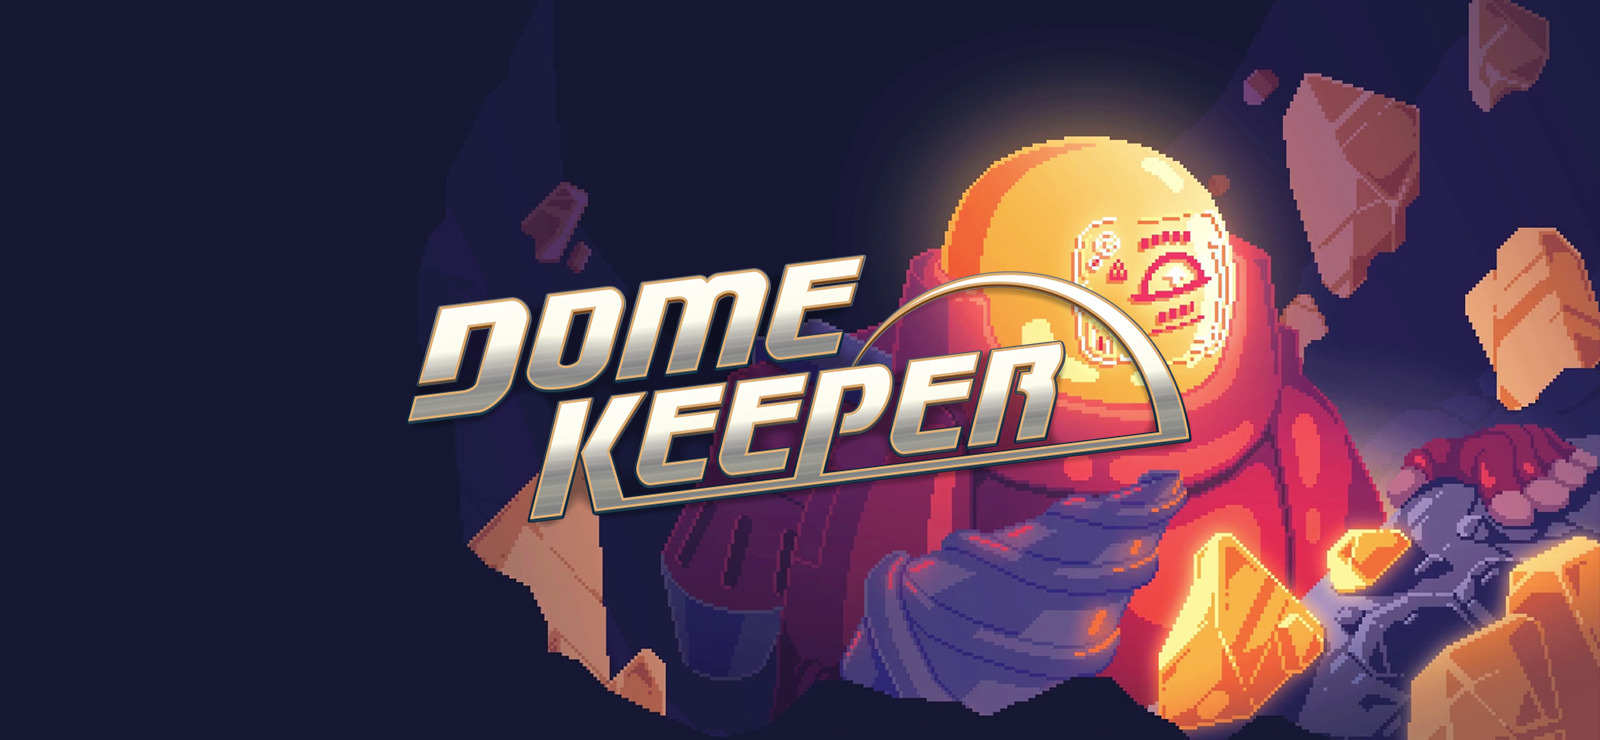 Dome keeper download 70 743 book pdf free download